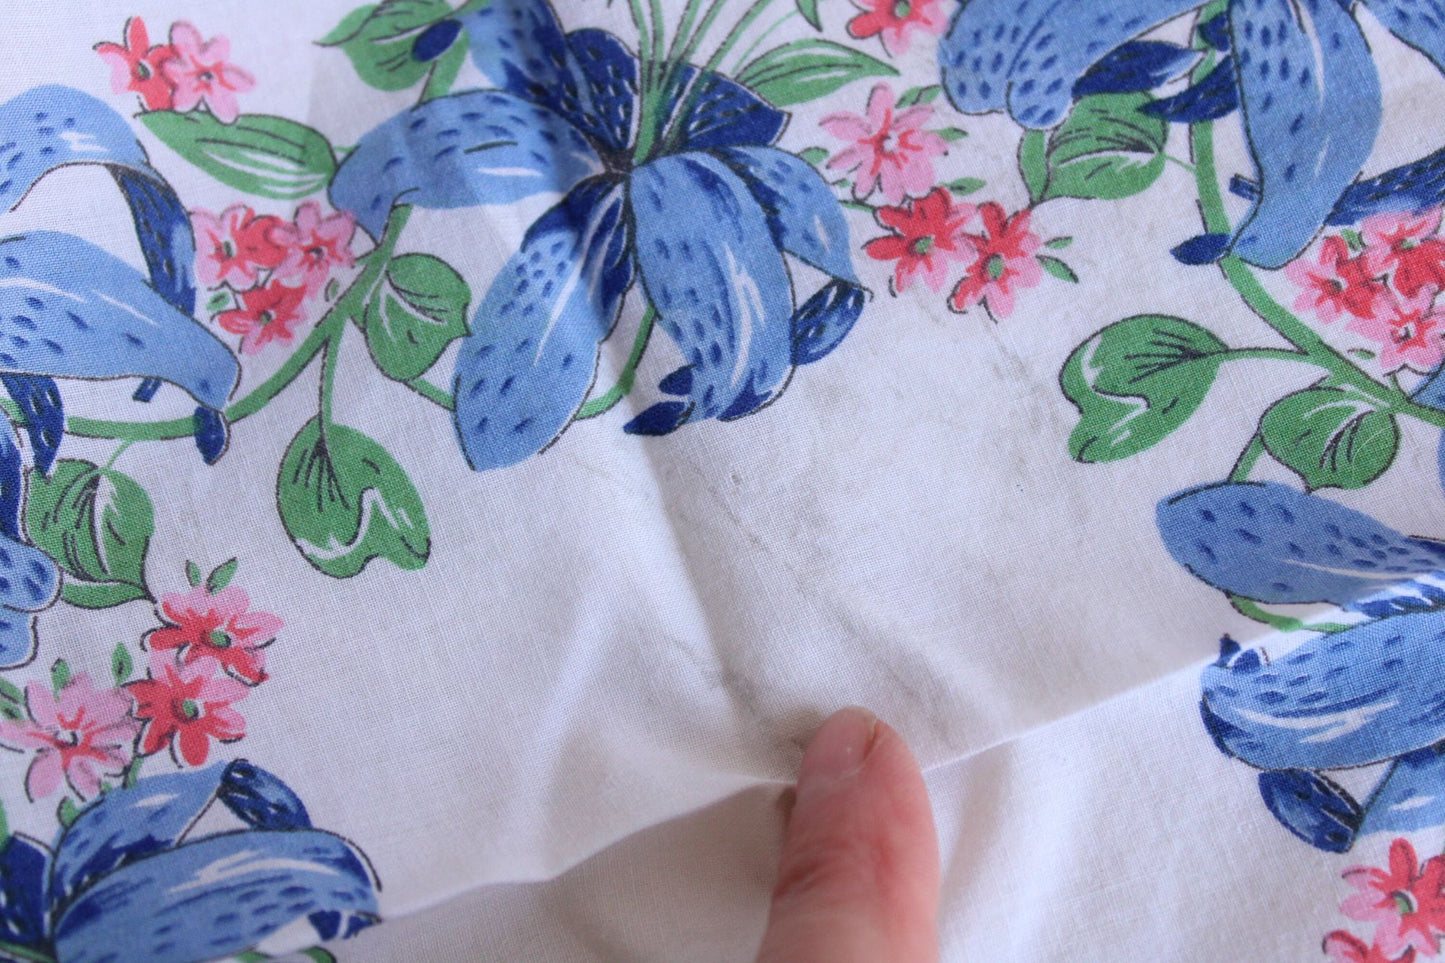 Vintage Cotton Handkerchief with Blue and Pink Flowers